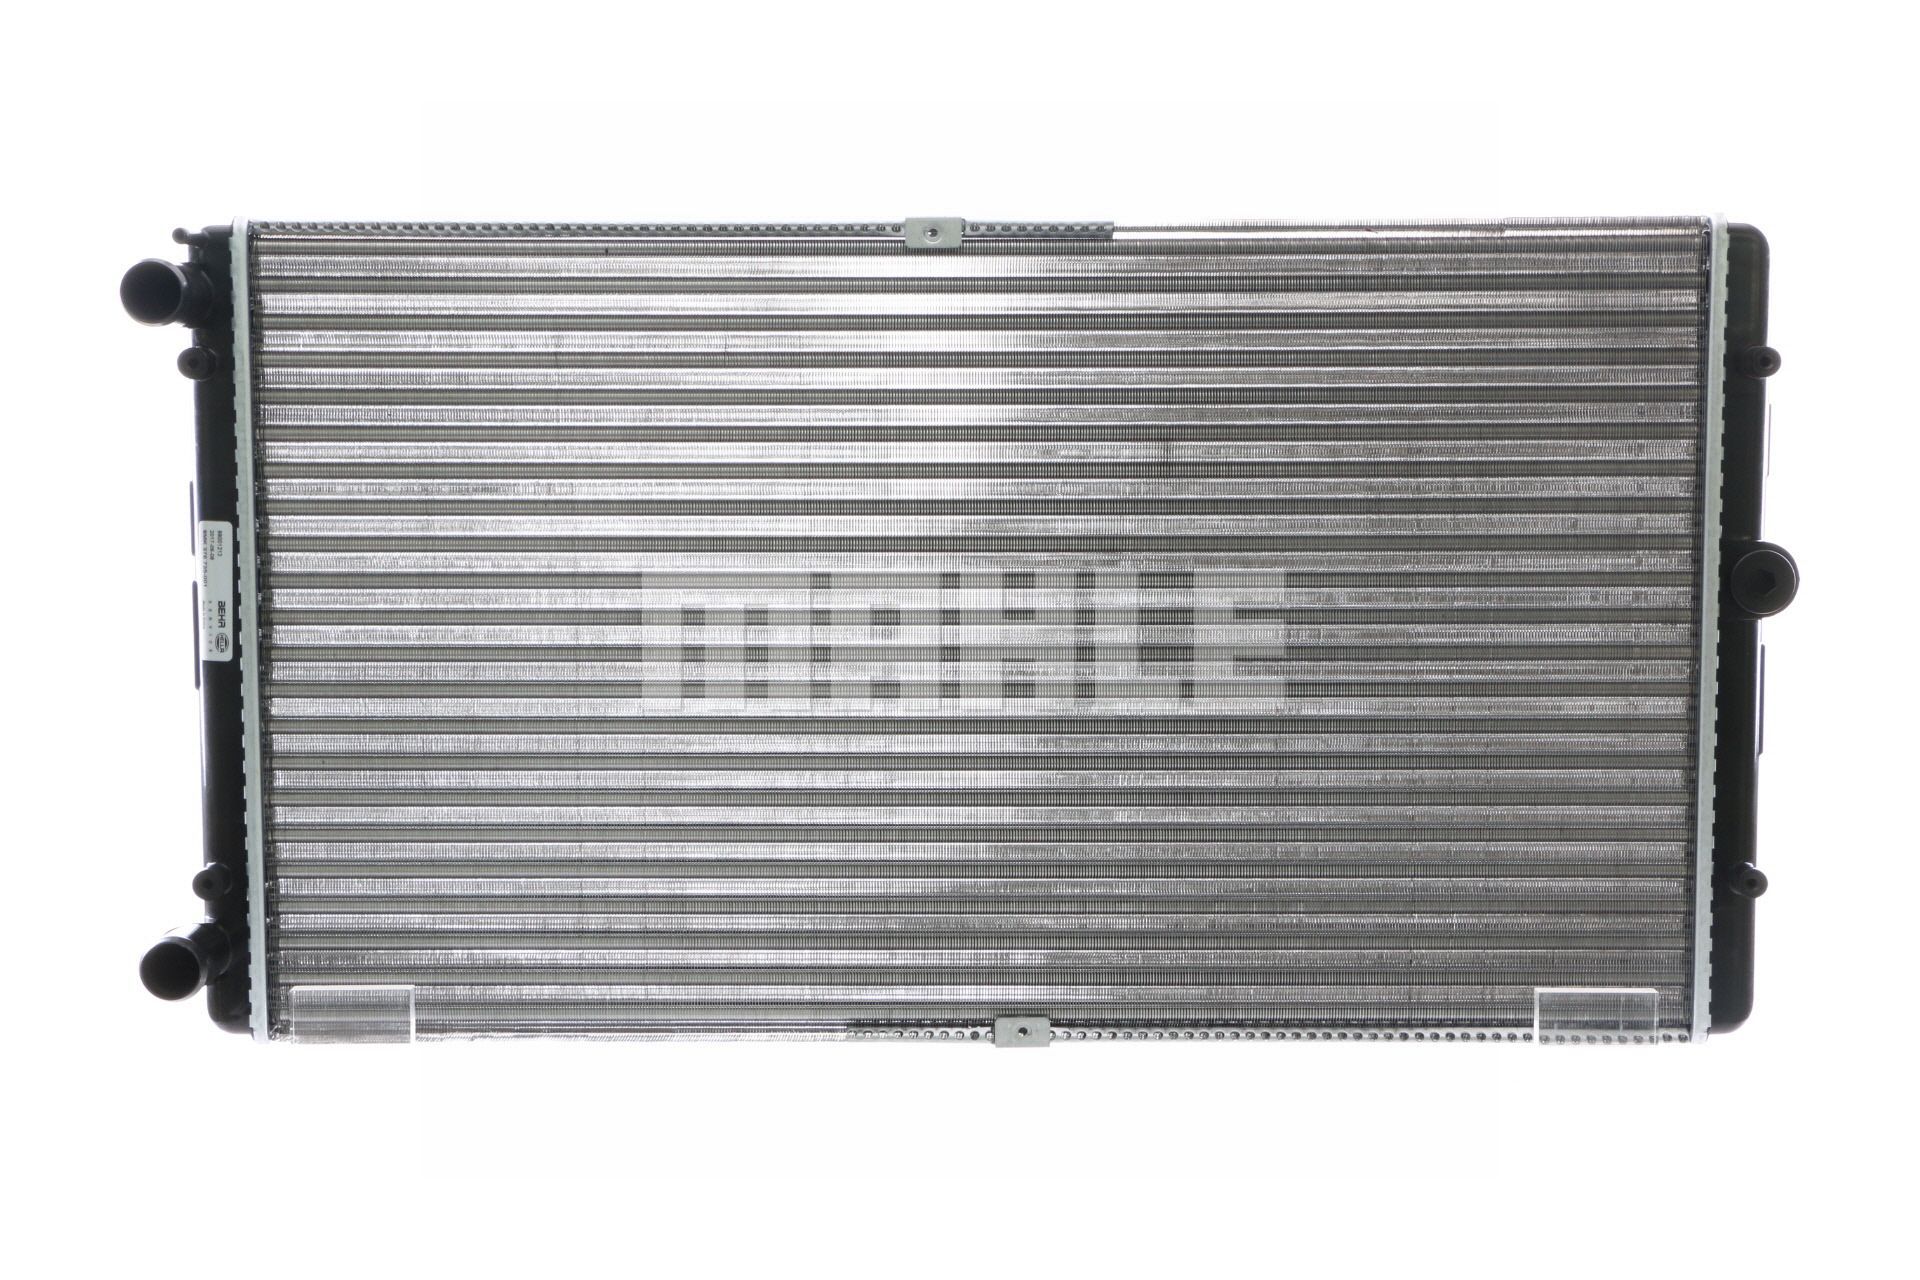 MAHLE ORIGINAL CR 829 000S Engine radiator for vehicles with long front, 720 x 416 x 34 mm, Mechanically jointed cooling fins